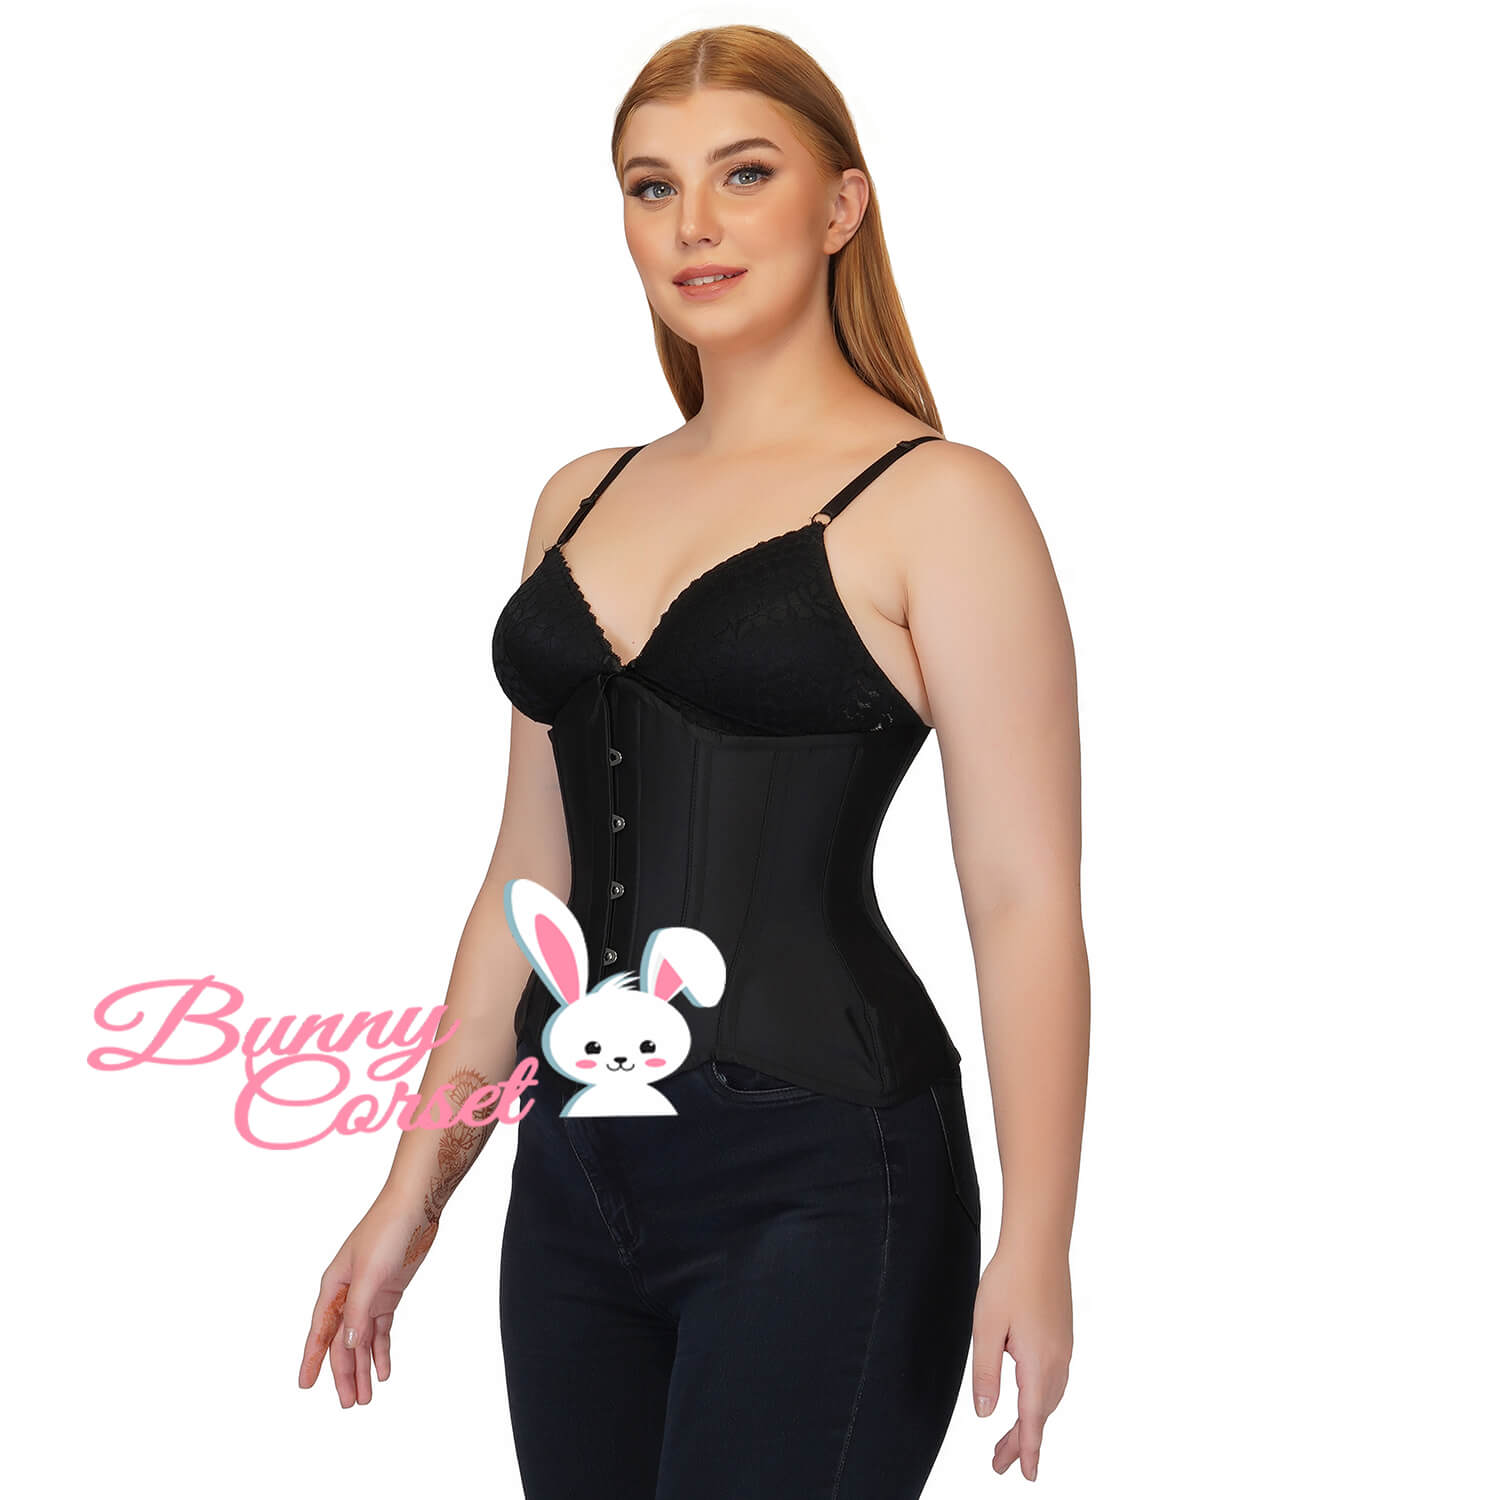 This Underbust curvy corset is perfect – Bunny Corset